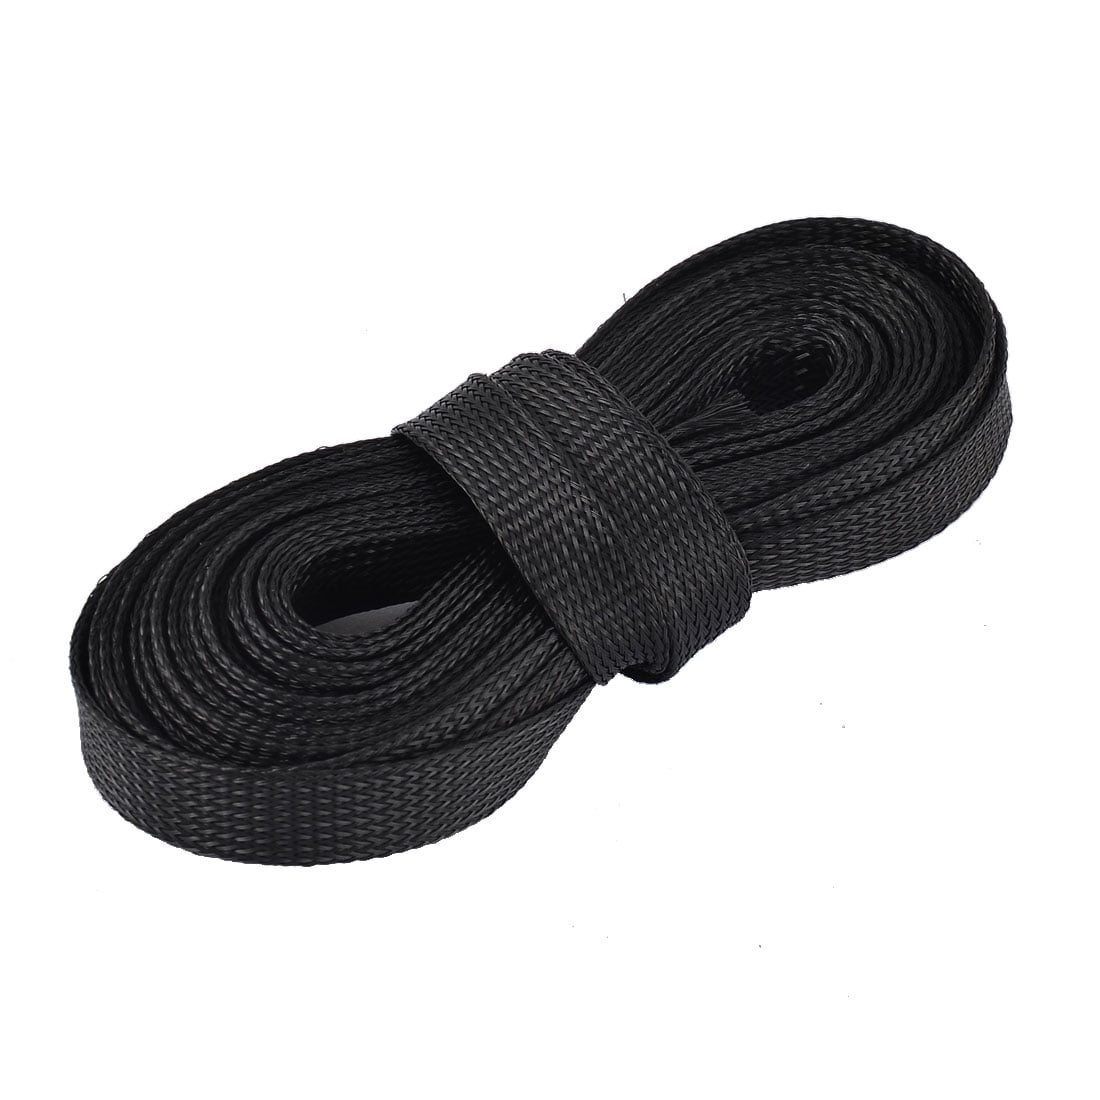 2" Black Expandable Wire Cable Sleeving Sheathing Braided Loom Tubing US 50 FT 